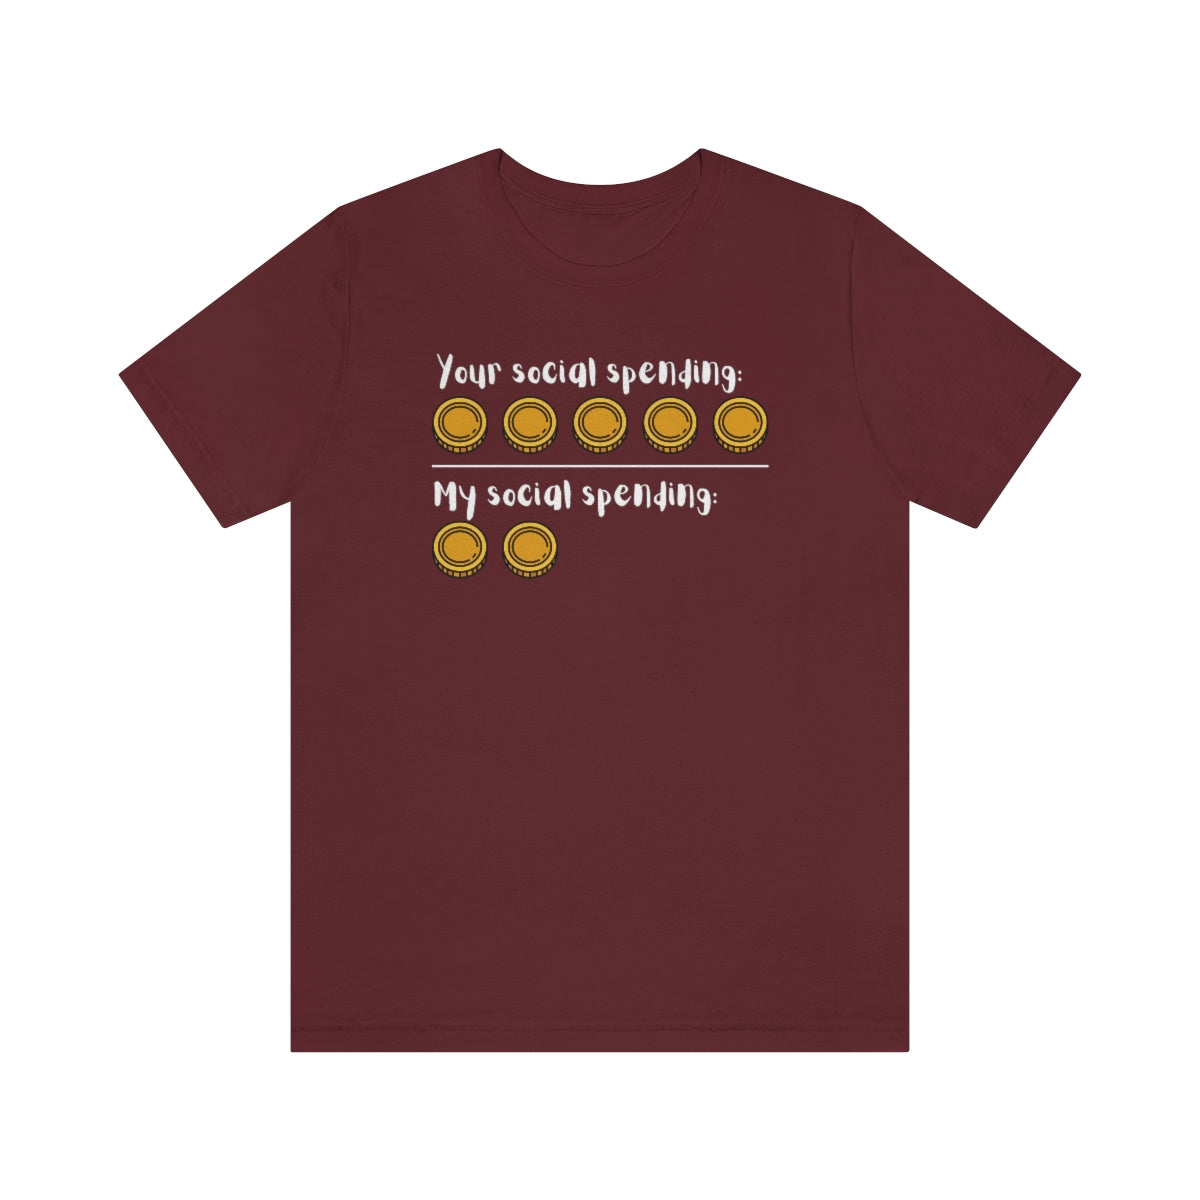 A maroon shirt with the text "Your social spending" with 5 coins  and "my social spending" with 2 coins